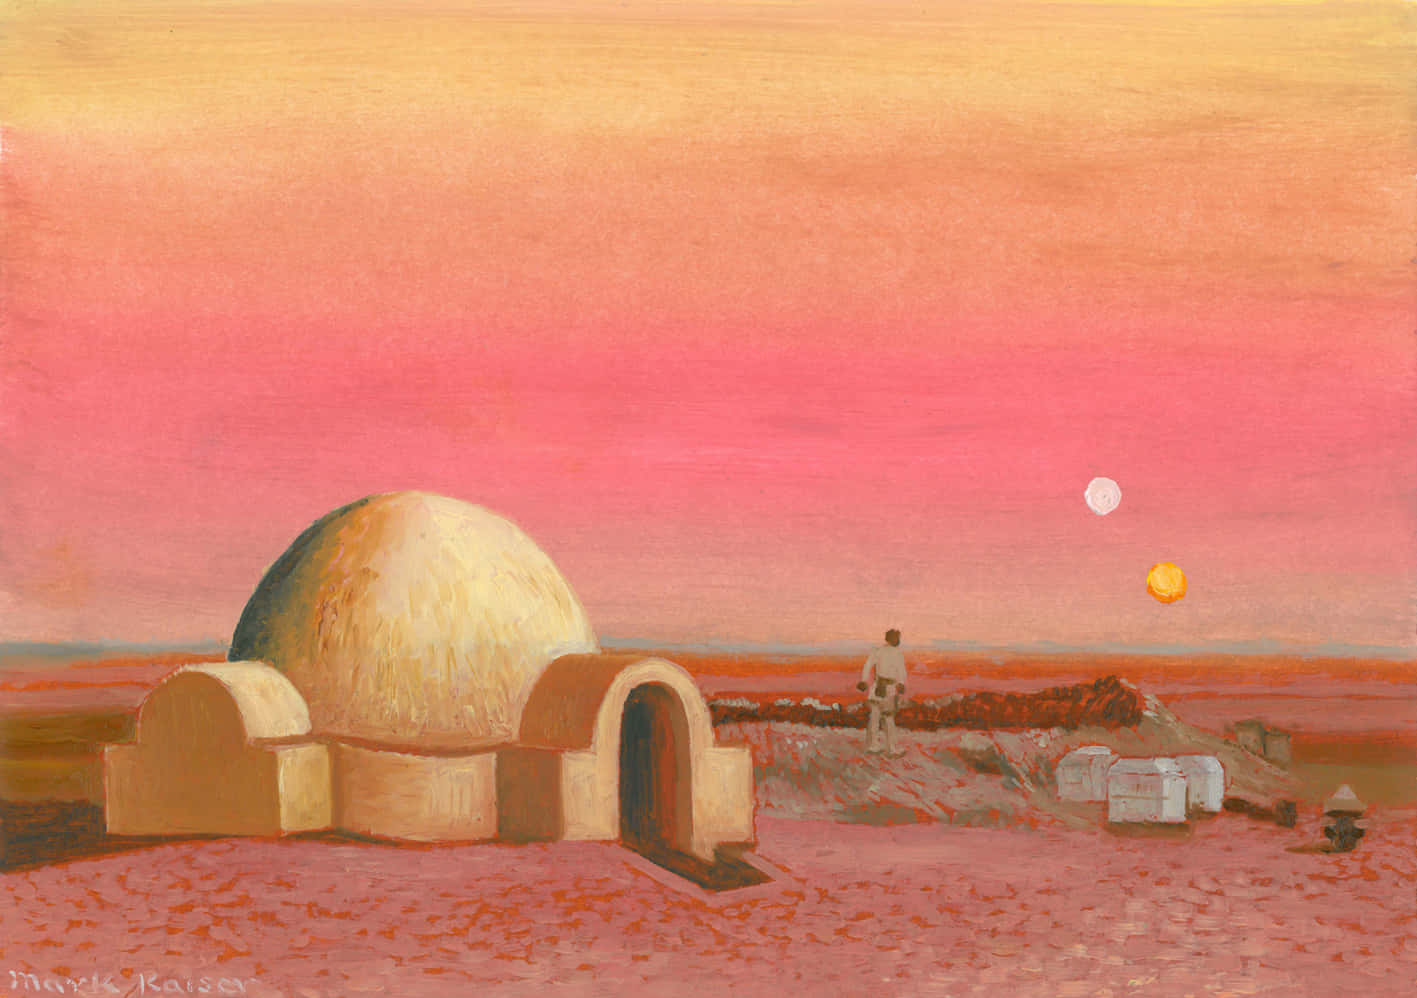 A view of Tatooine - where dreams of adventure come alive." Wallpaper